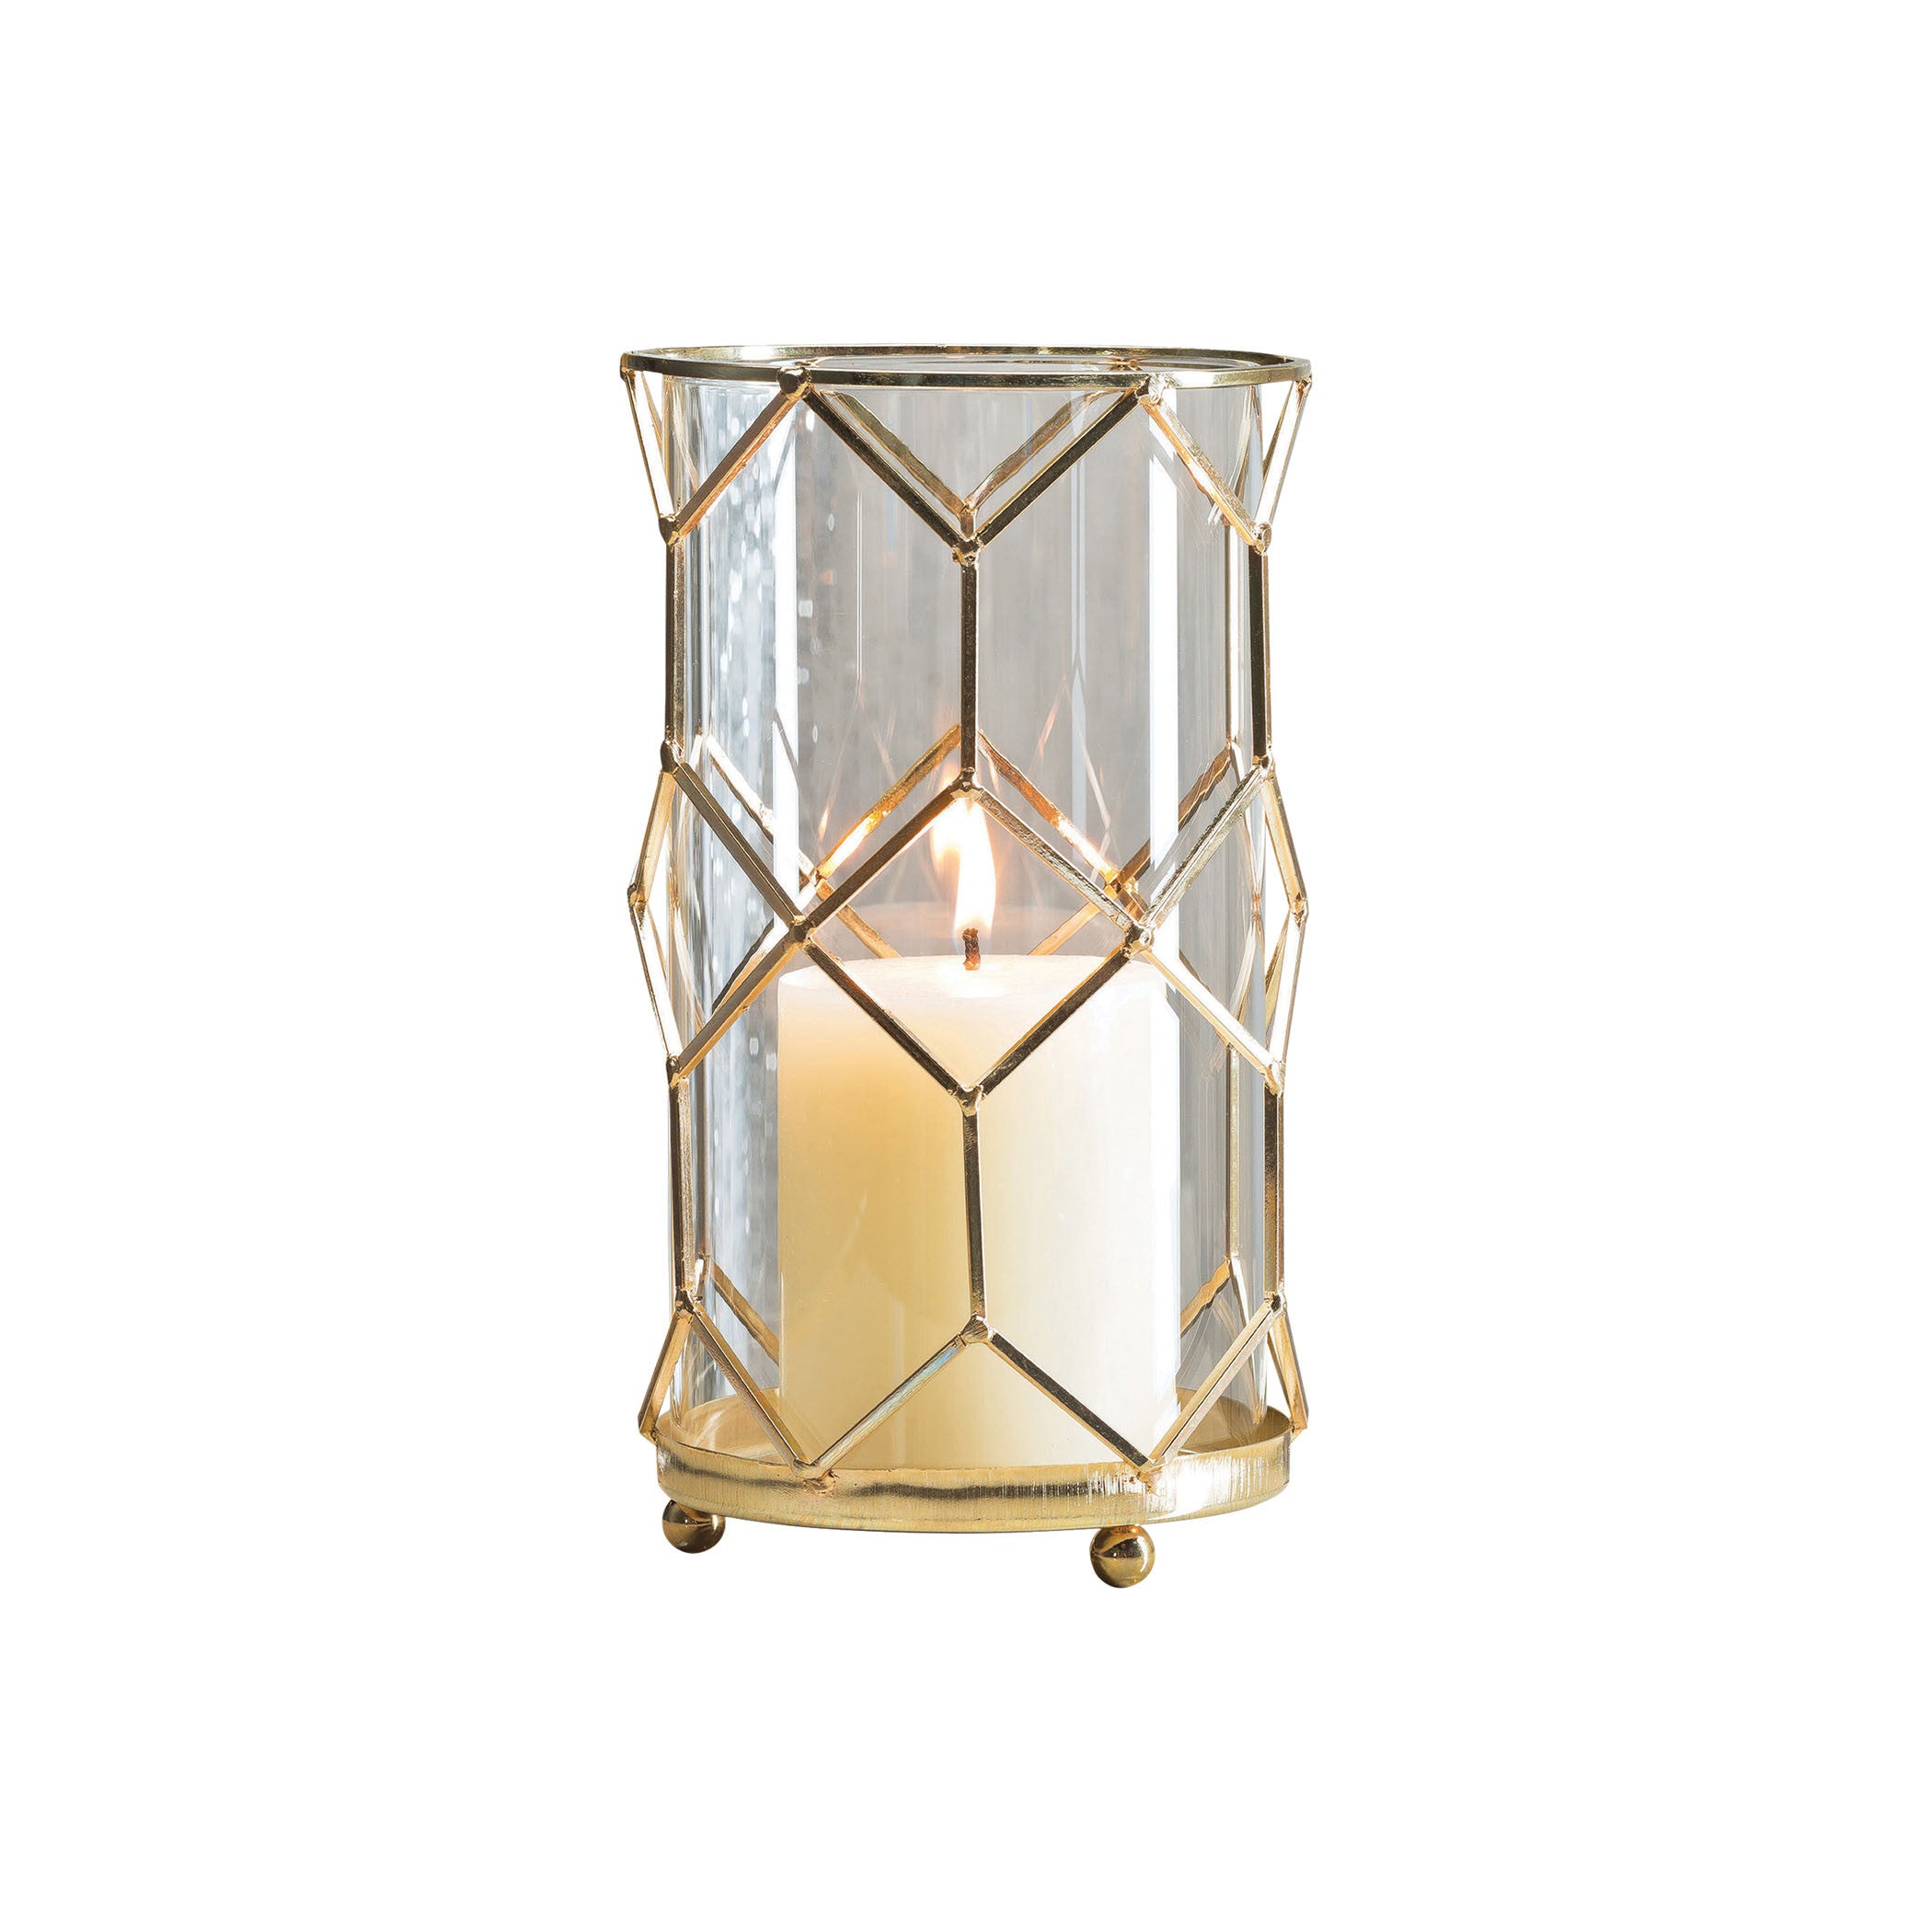 Pomeroy Pom-291111 Geo Collection Gold,white Finish Candle/candle Holder